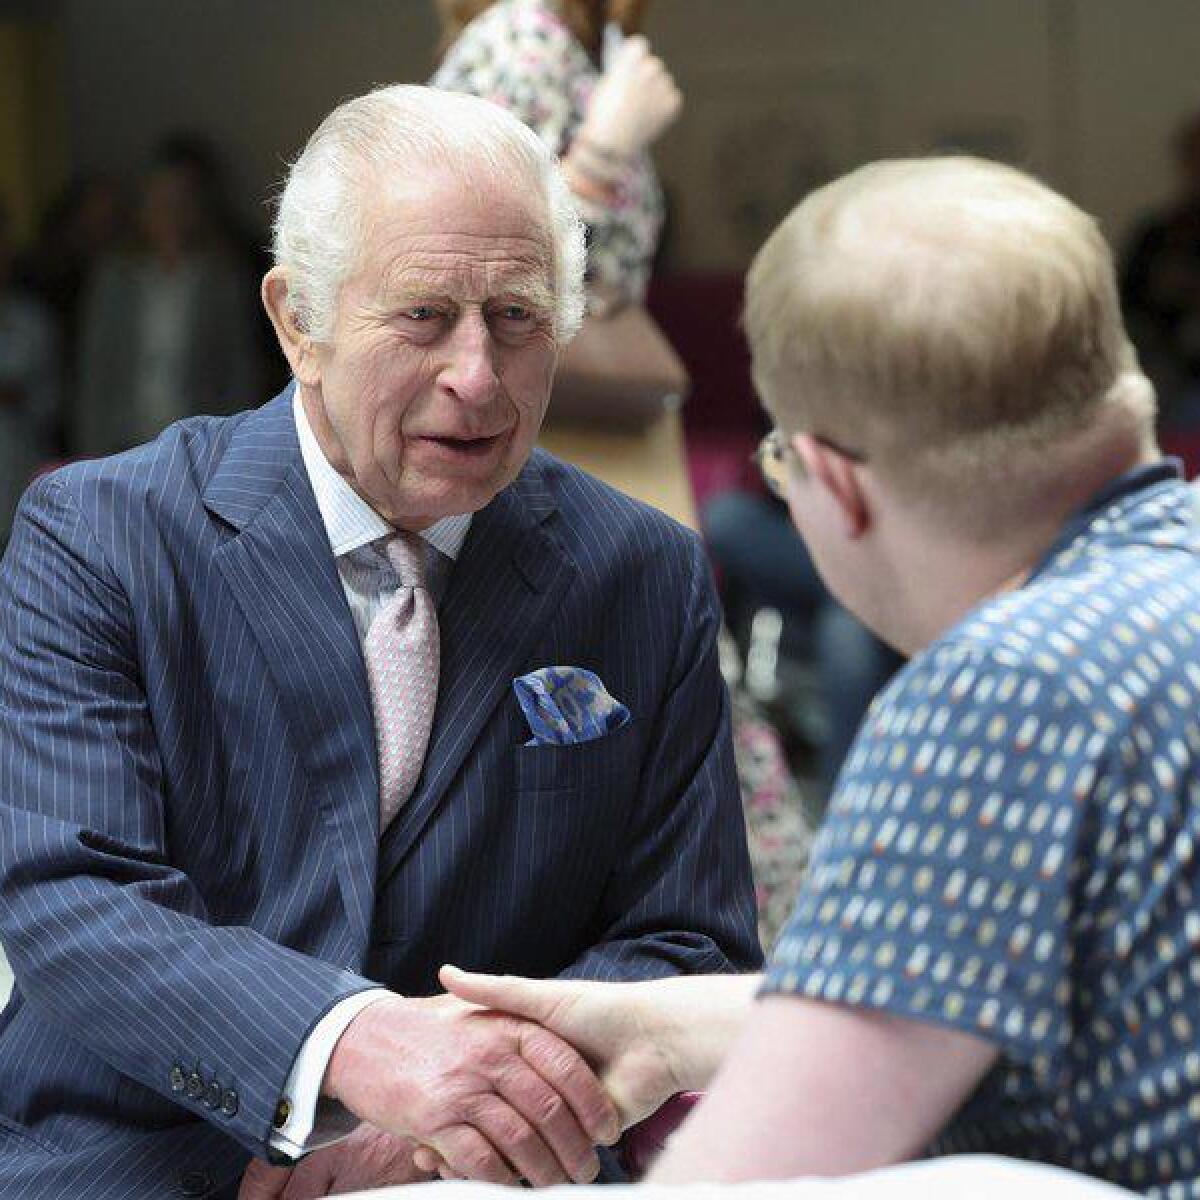 Britain's King Charles meets with a cancer patient